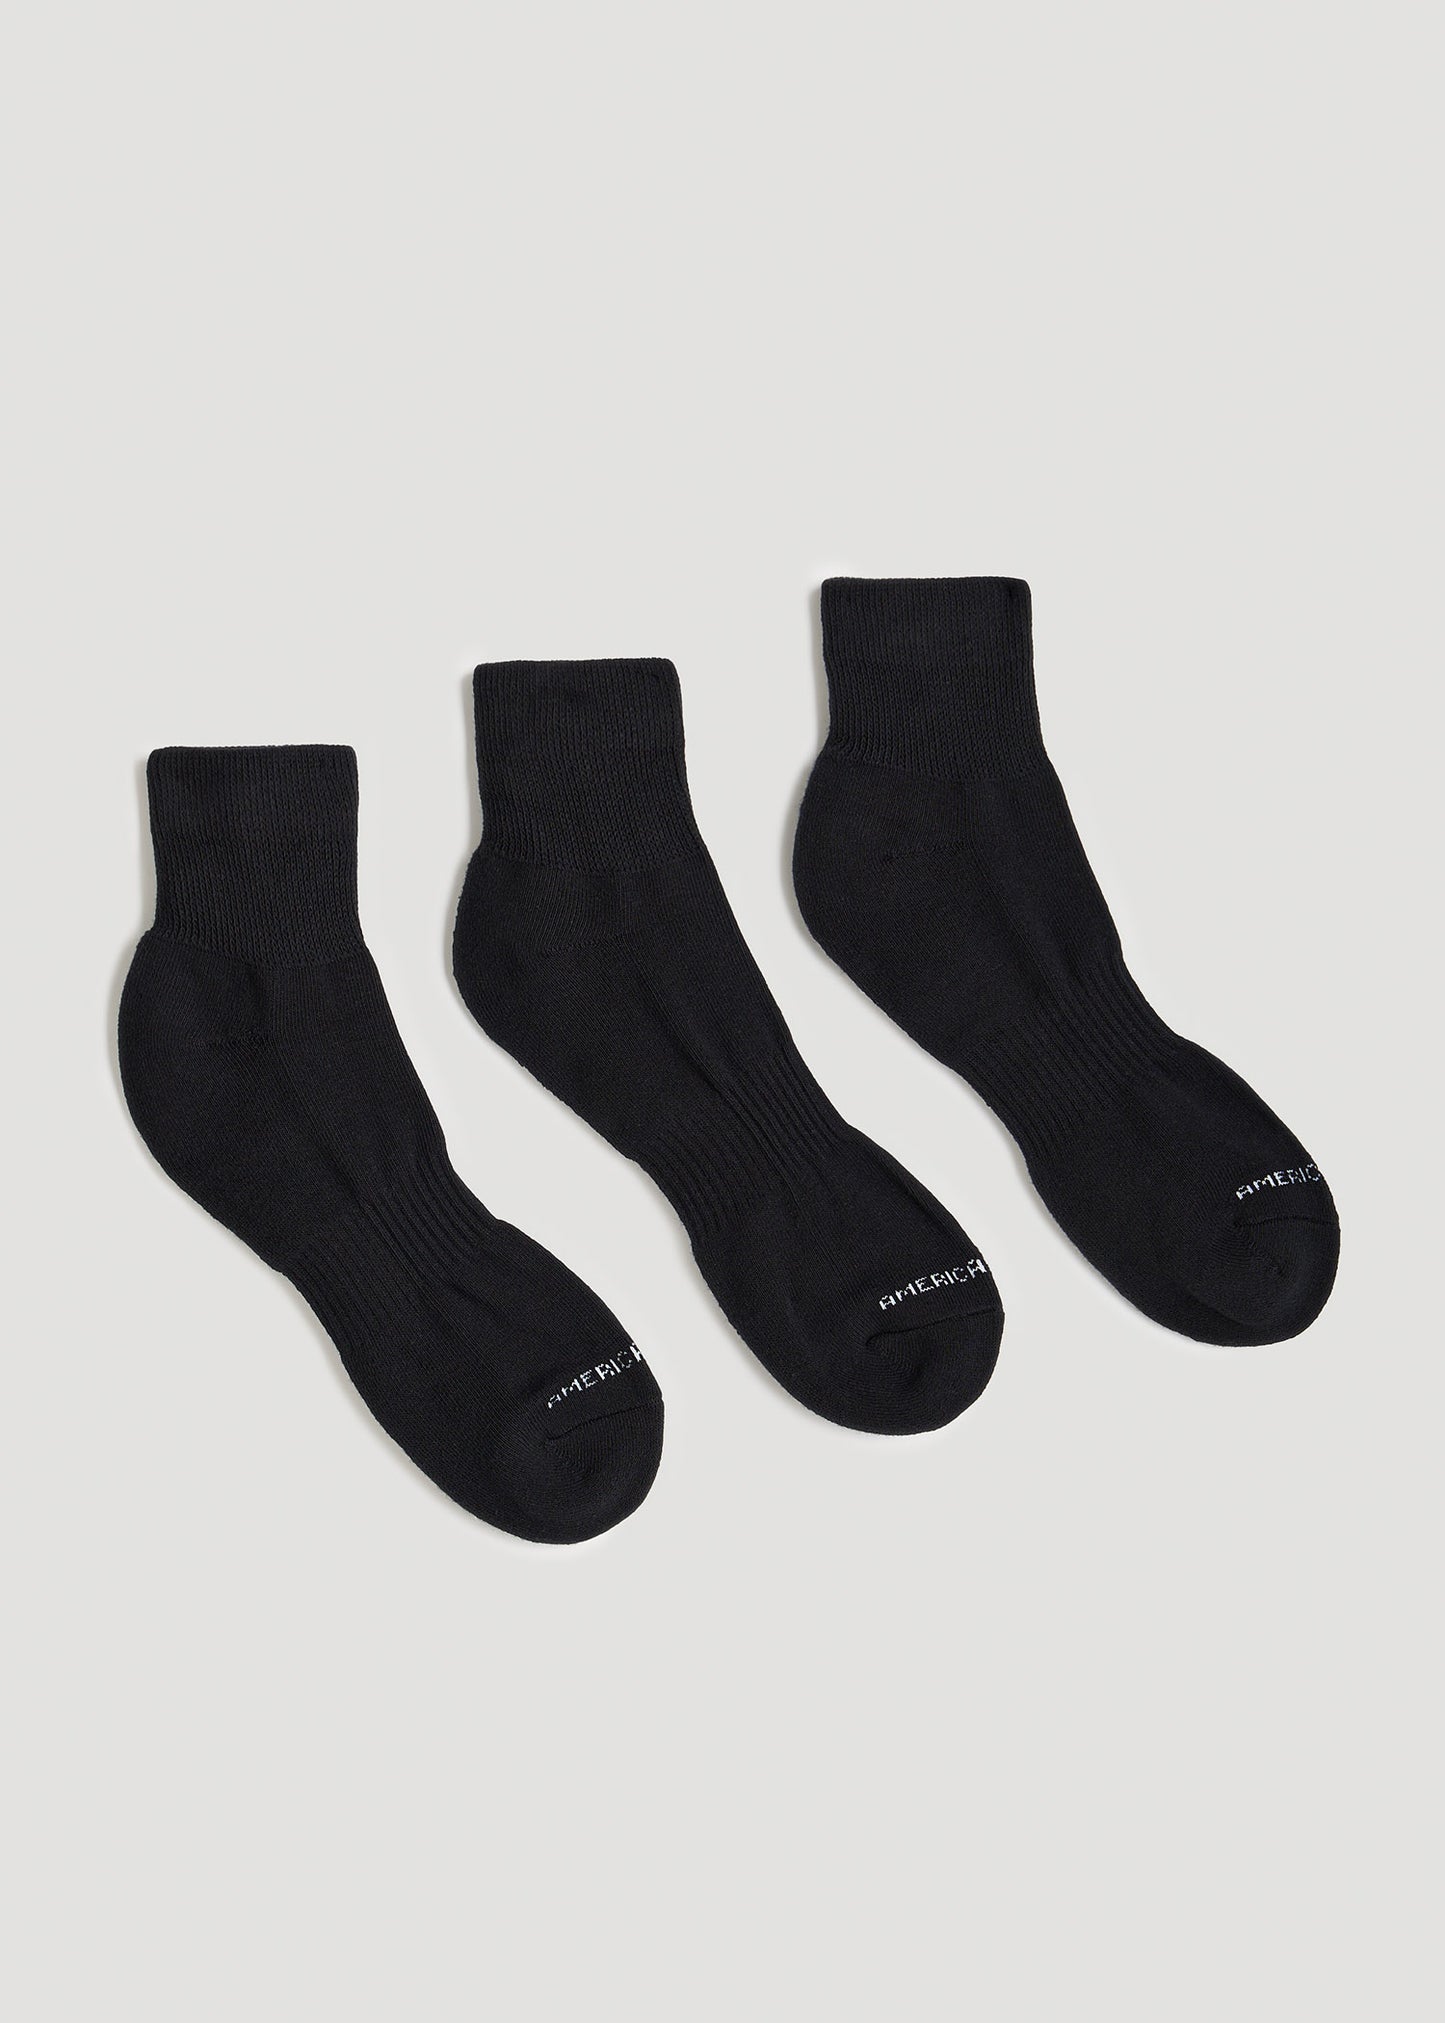       American-Tall-Mens-Athletic-Mid-Ankle-Socks-X-Large-Size-14-17-Black-3-Pack-back